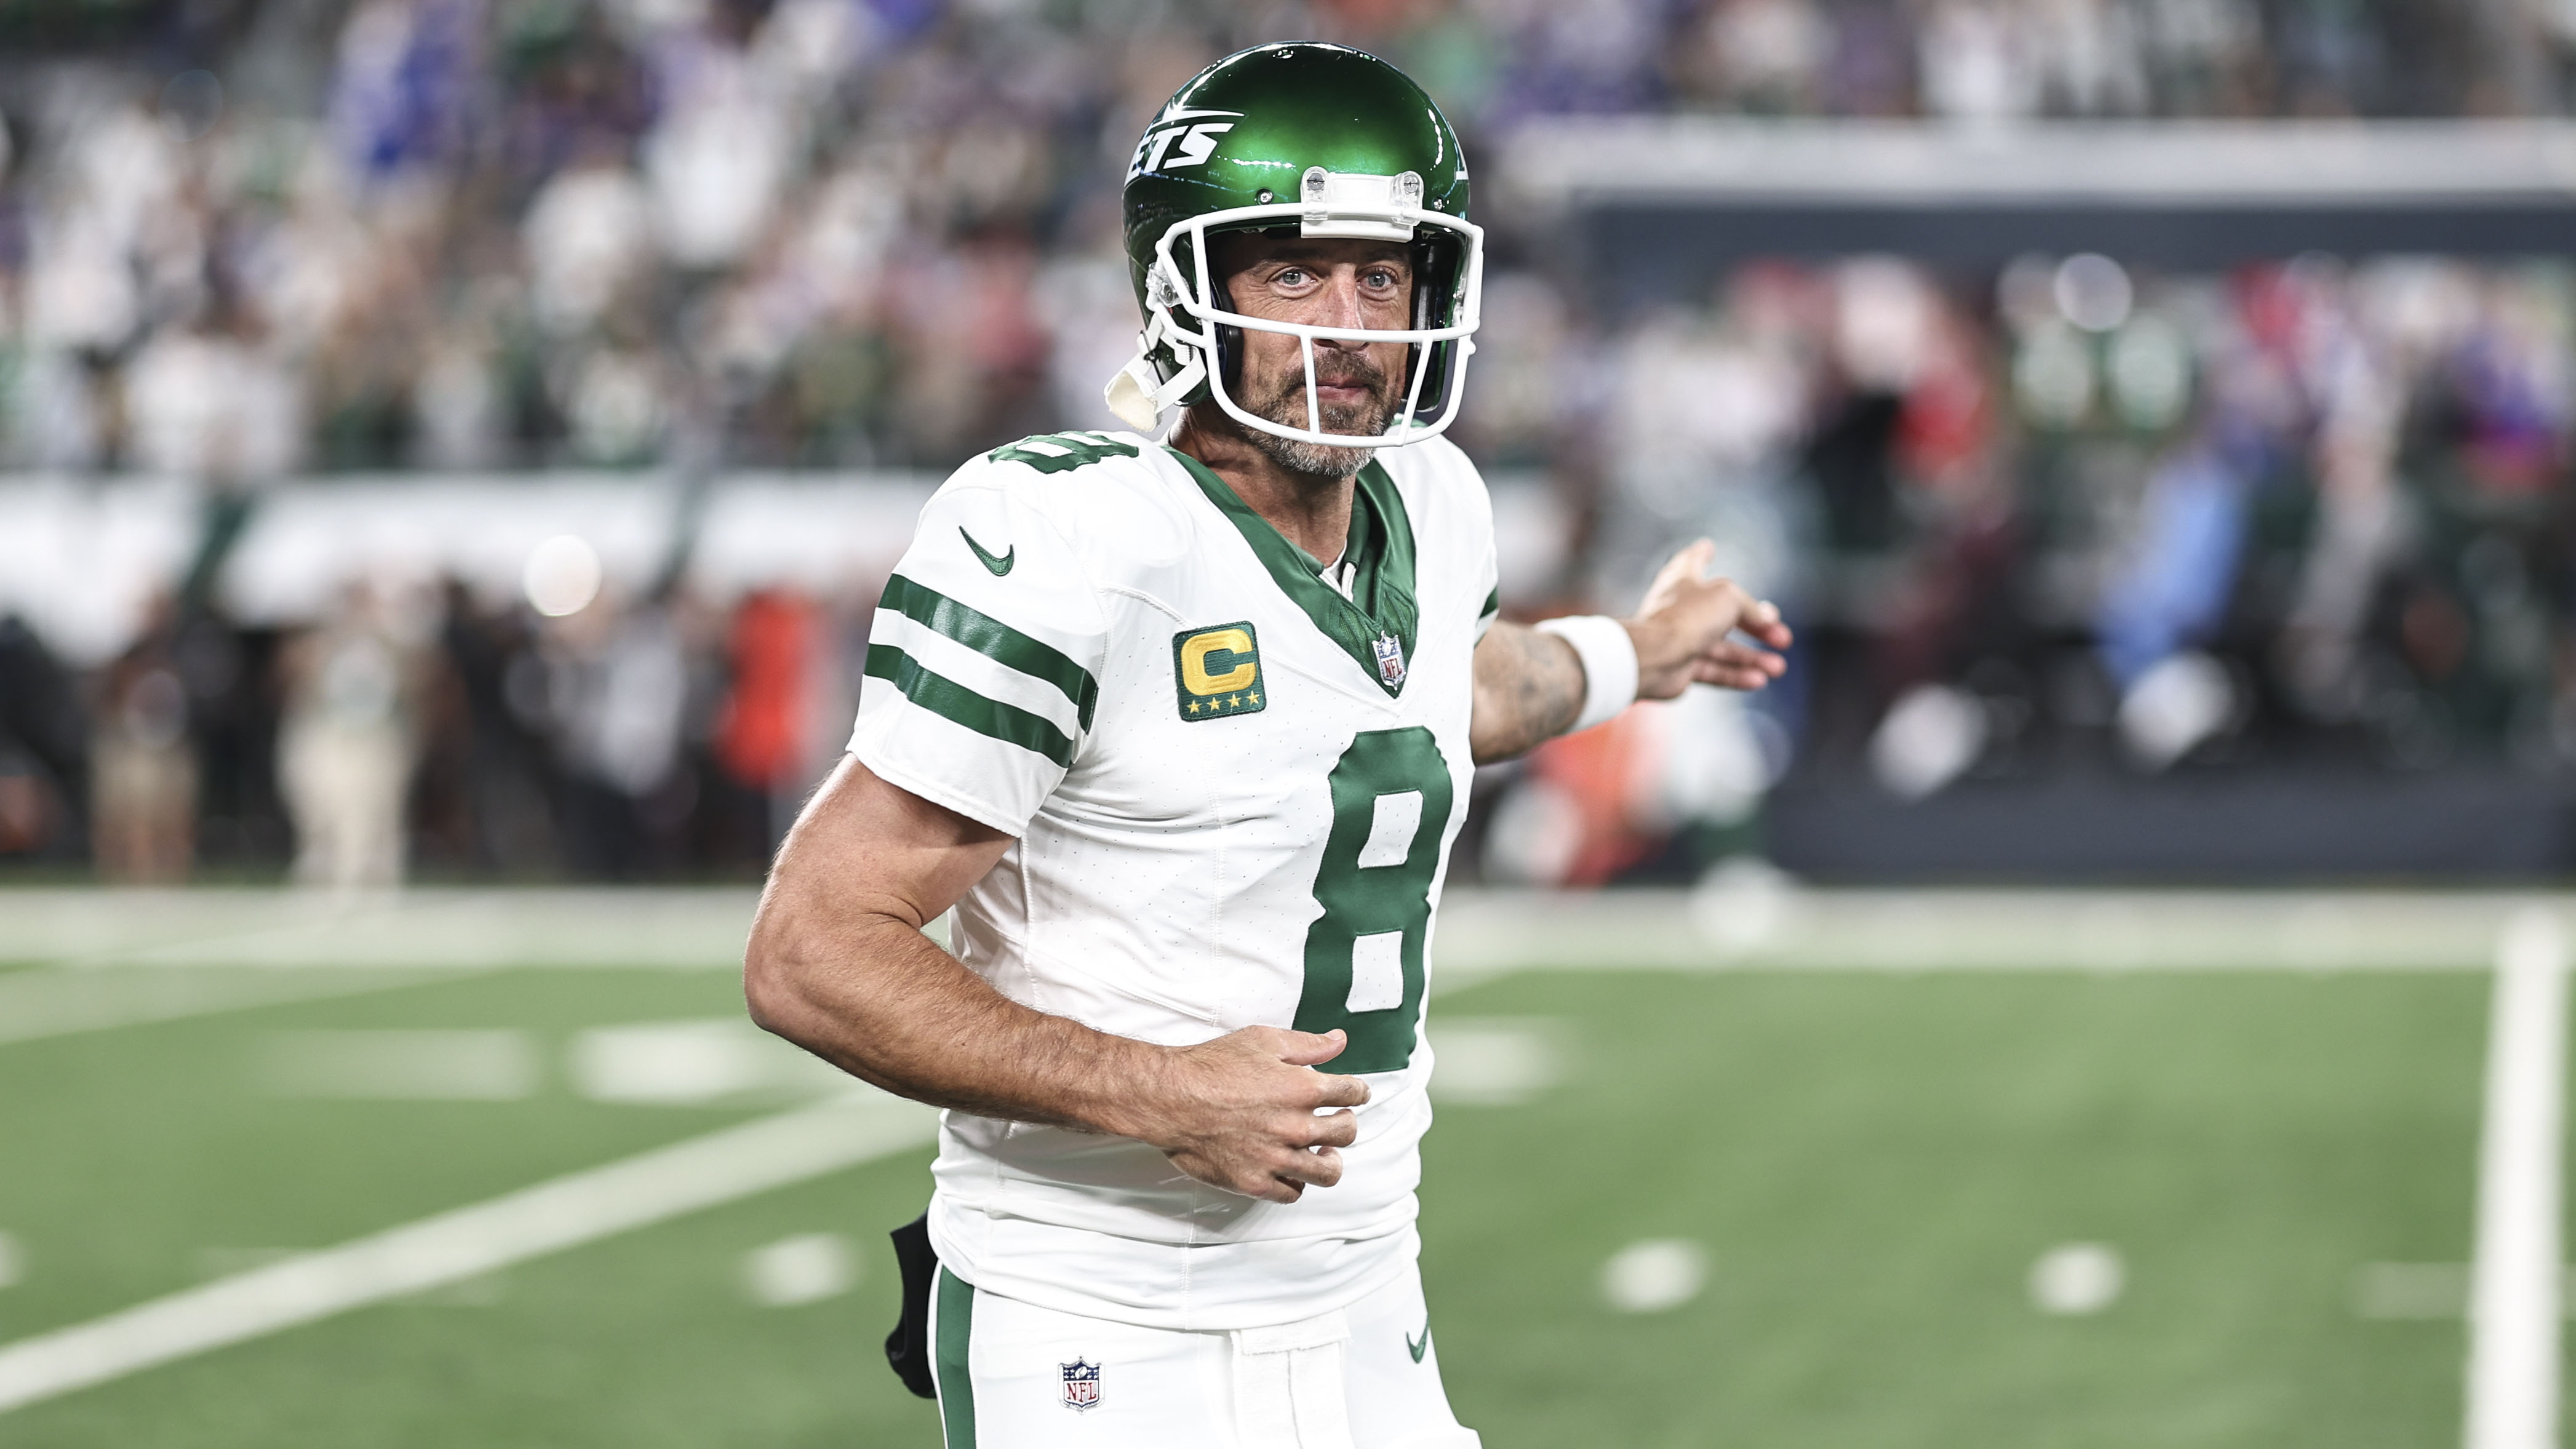 Aaron Rodgers aims to take Jets higher than they've been in a long time